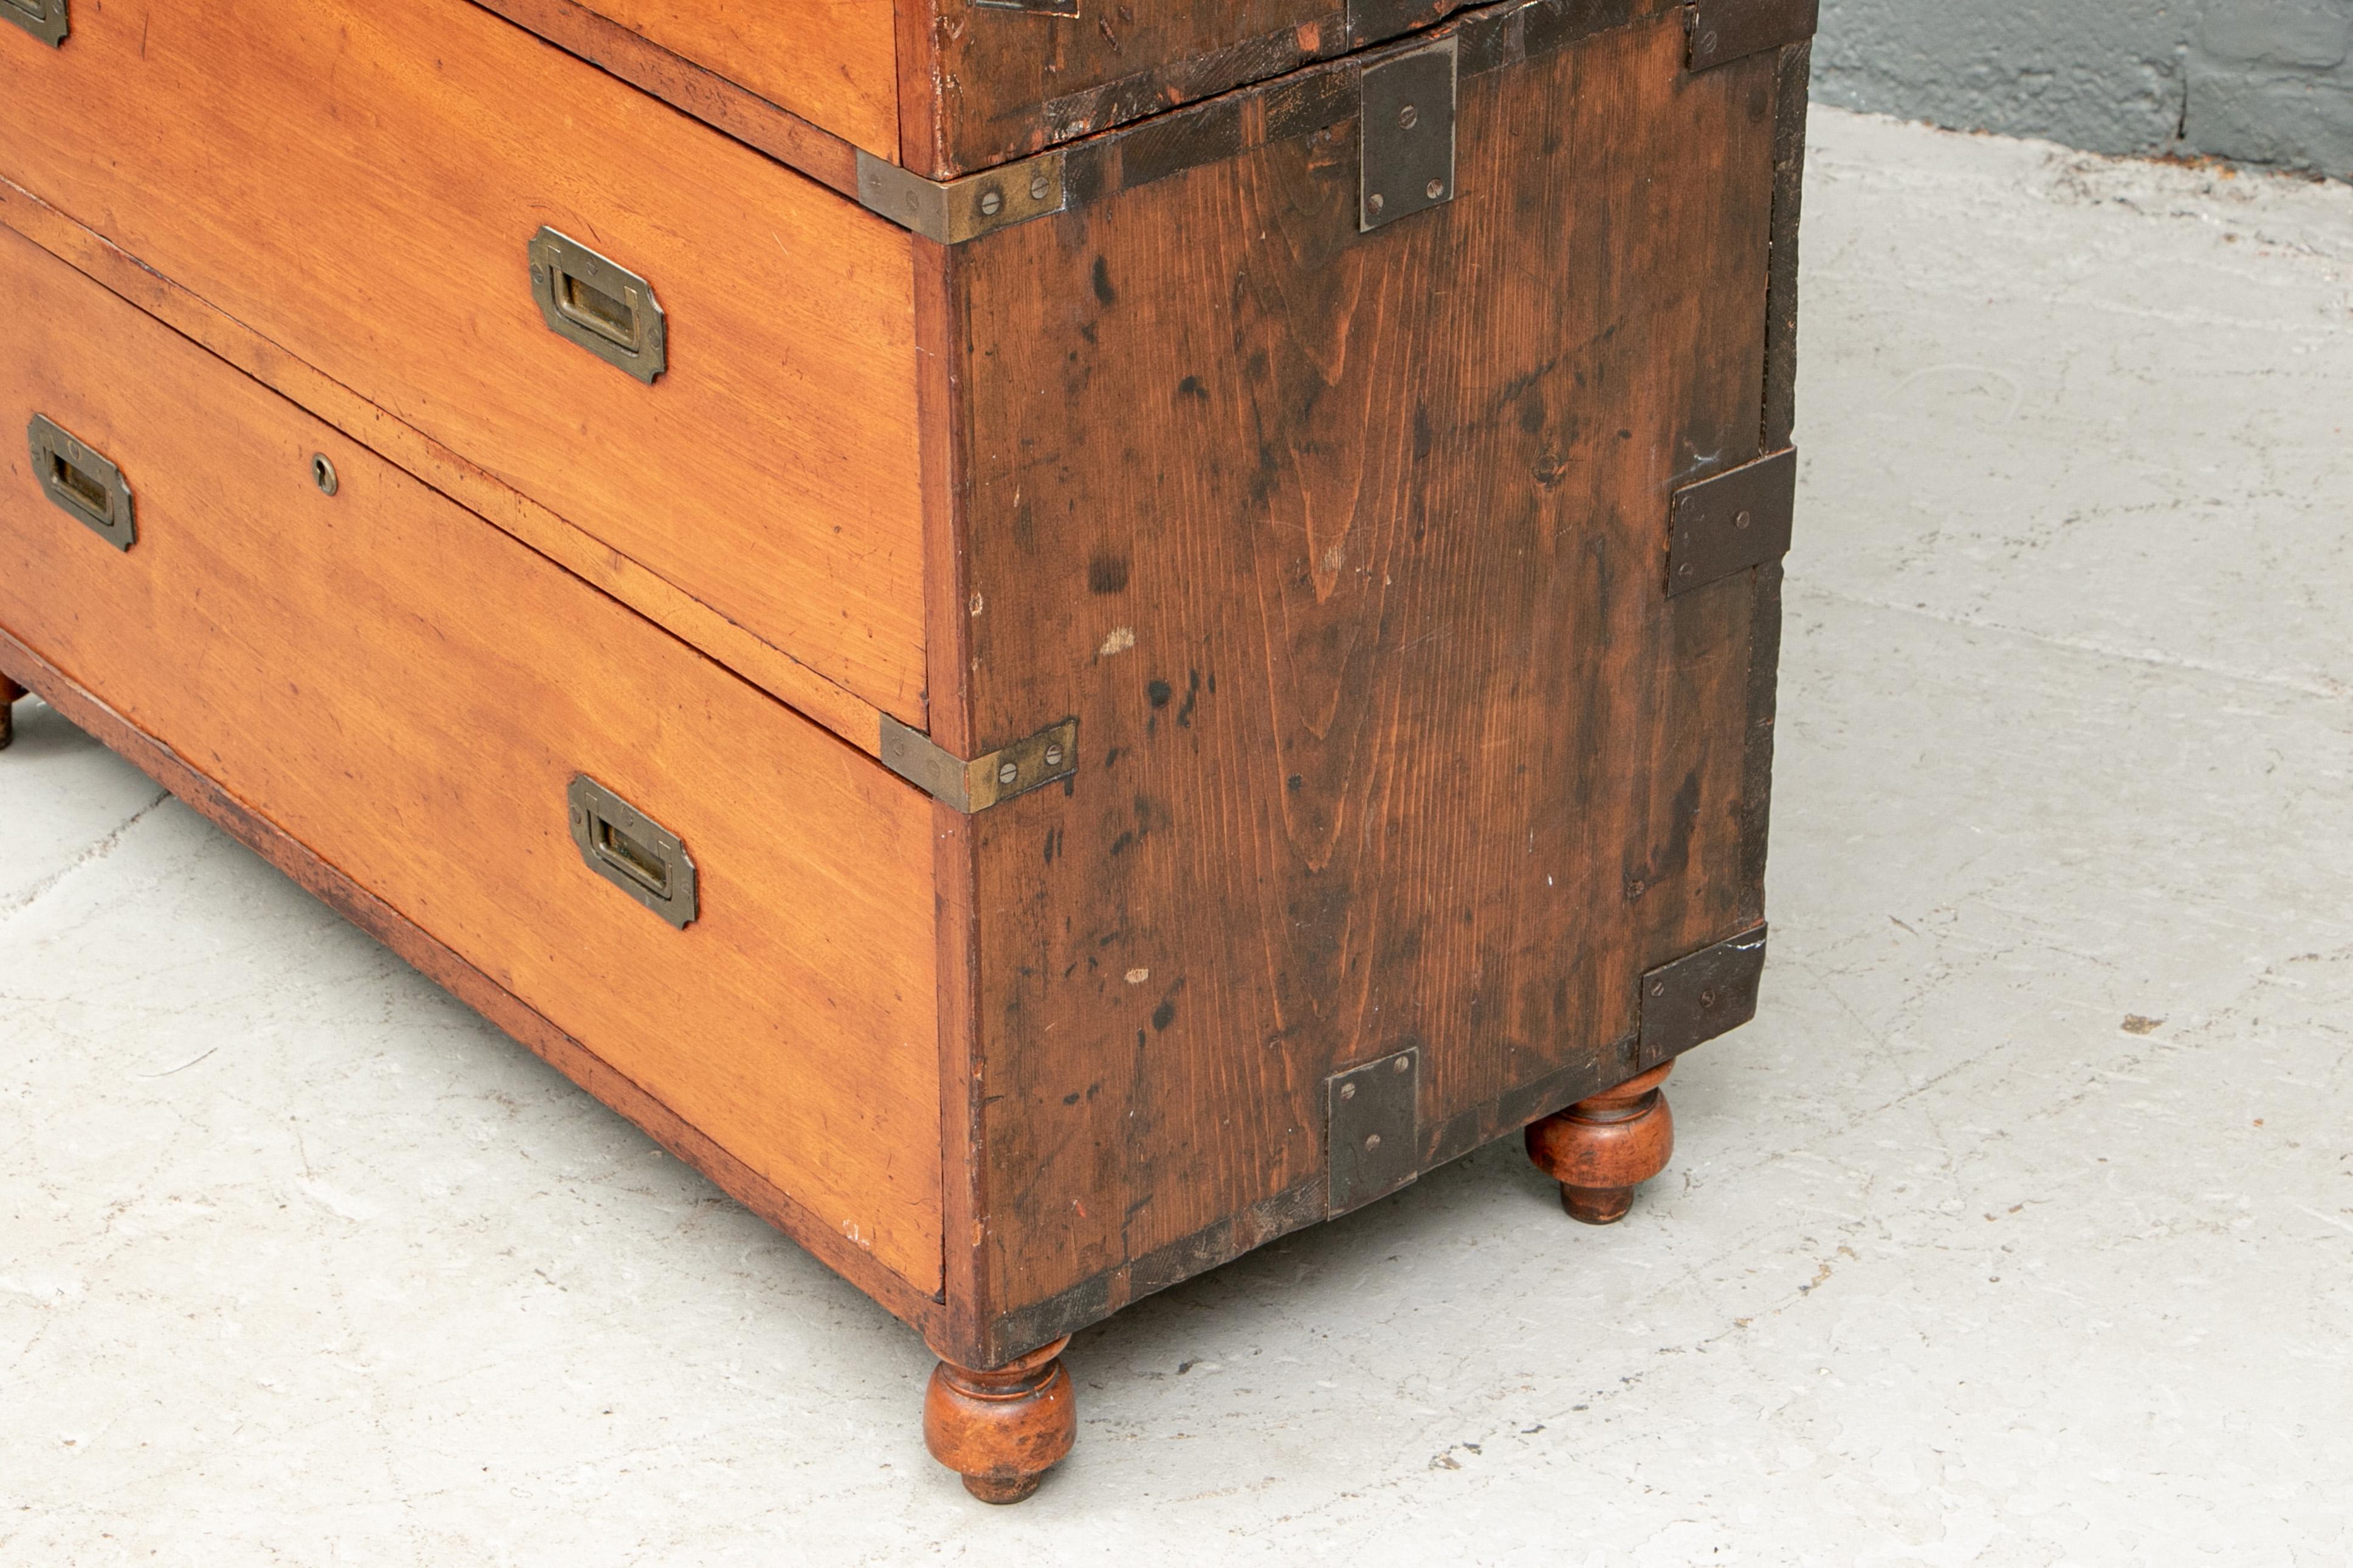 Late 18th-Early 19th Century Irish Campaign Chest by E. Ross, Dublin (Holz)